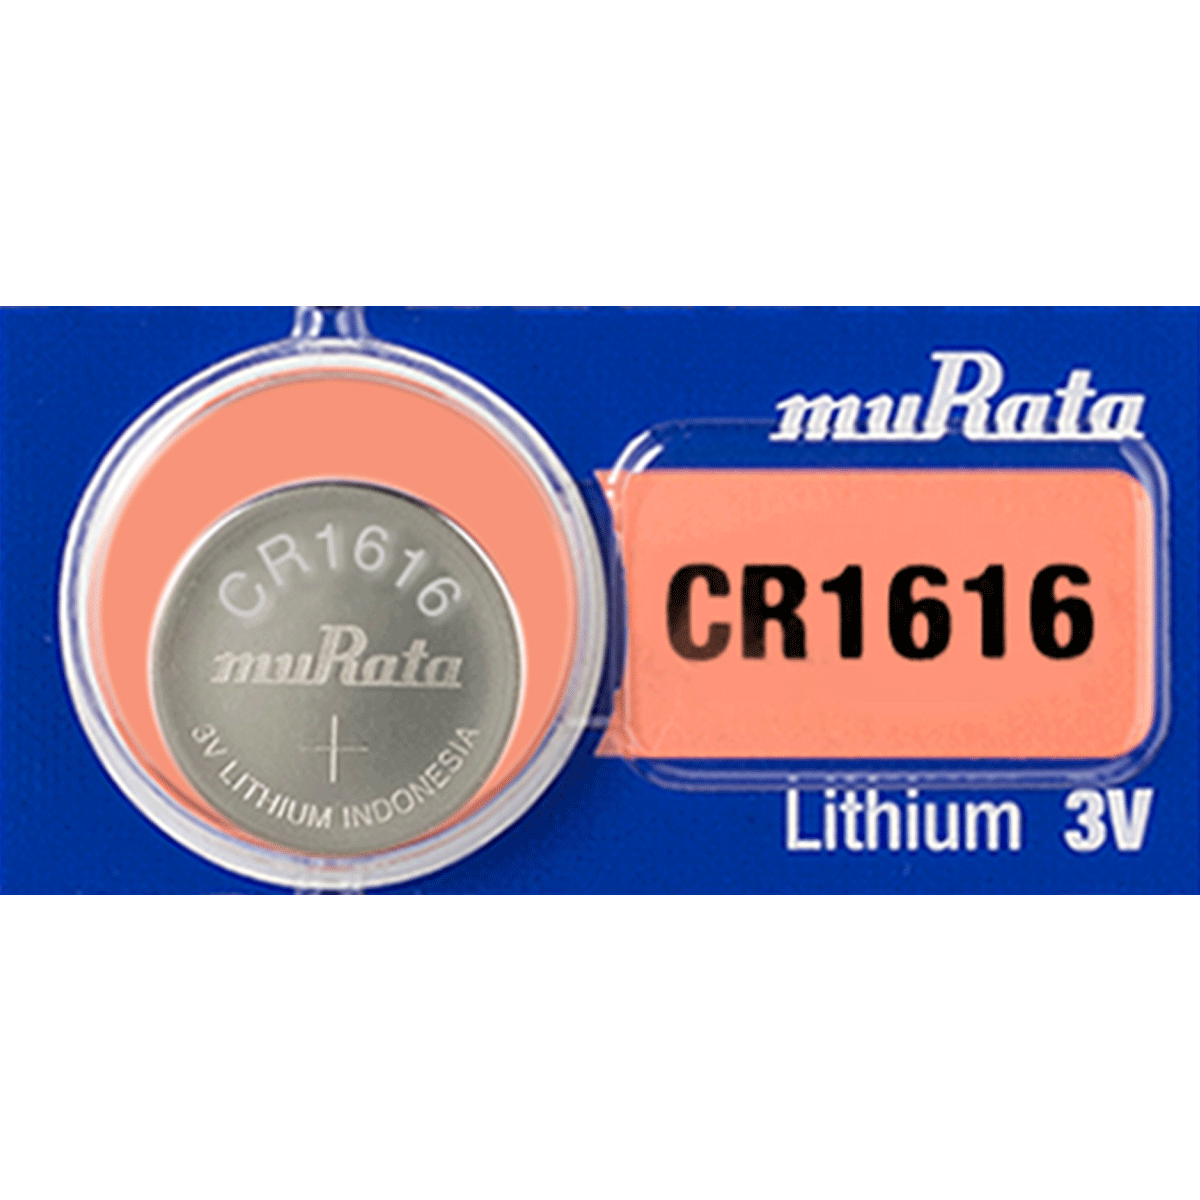 Murata CR1616 Battery 3V Lithium Coin Cell (1 PC) (formerly SONY) 